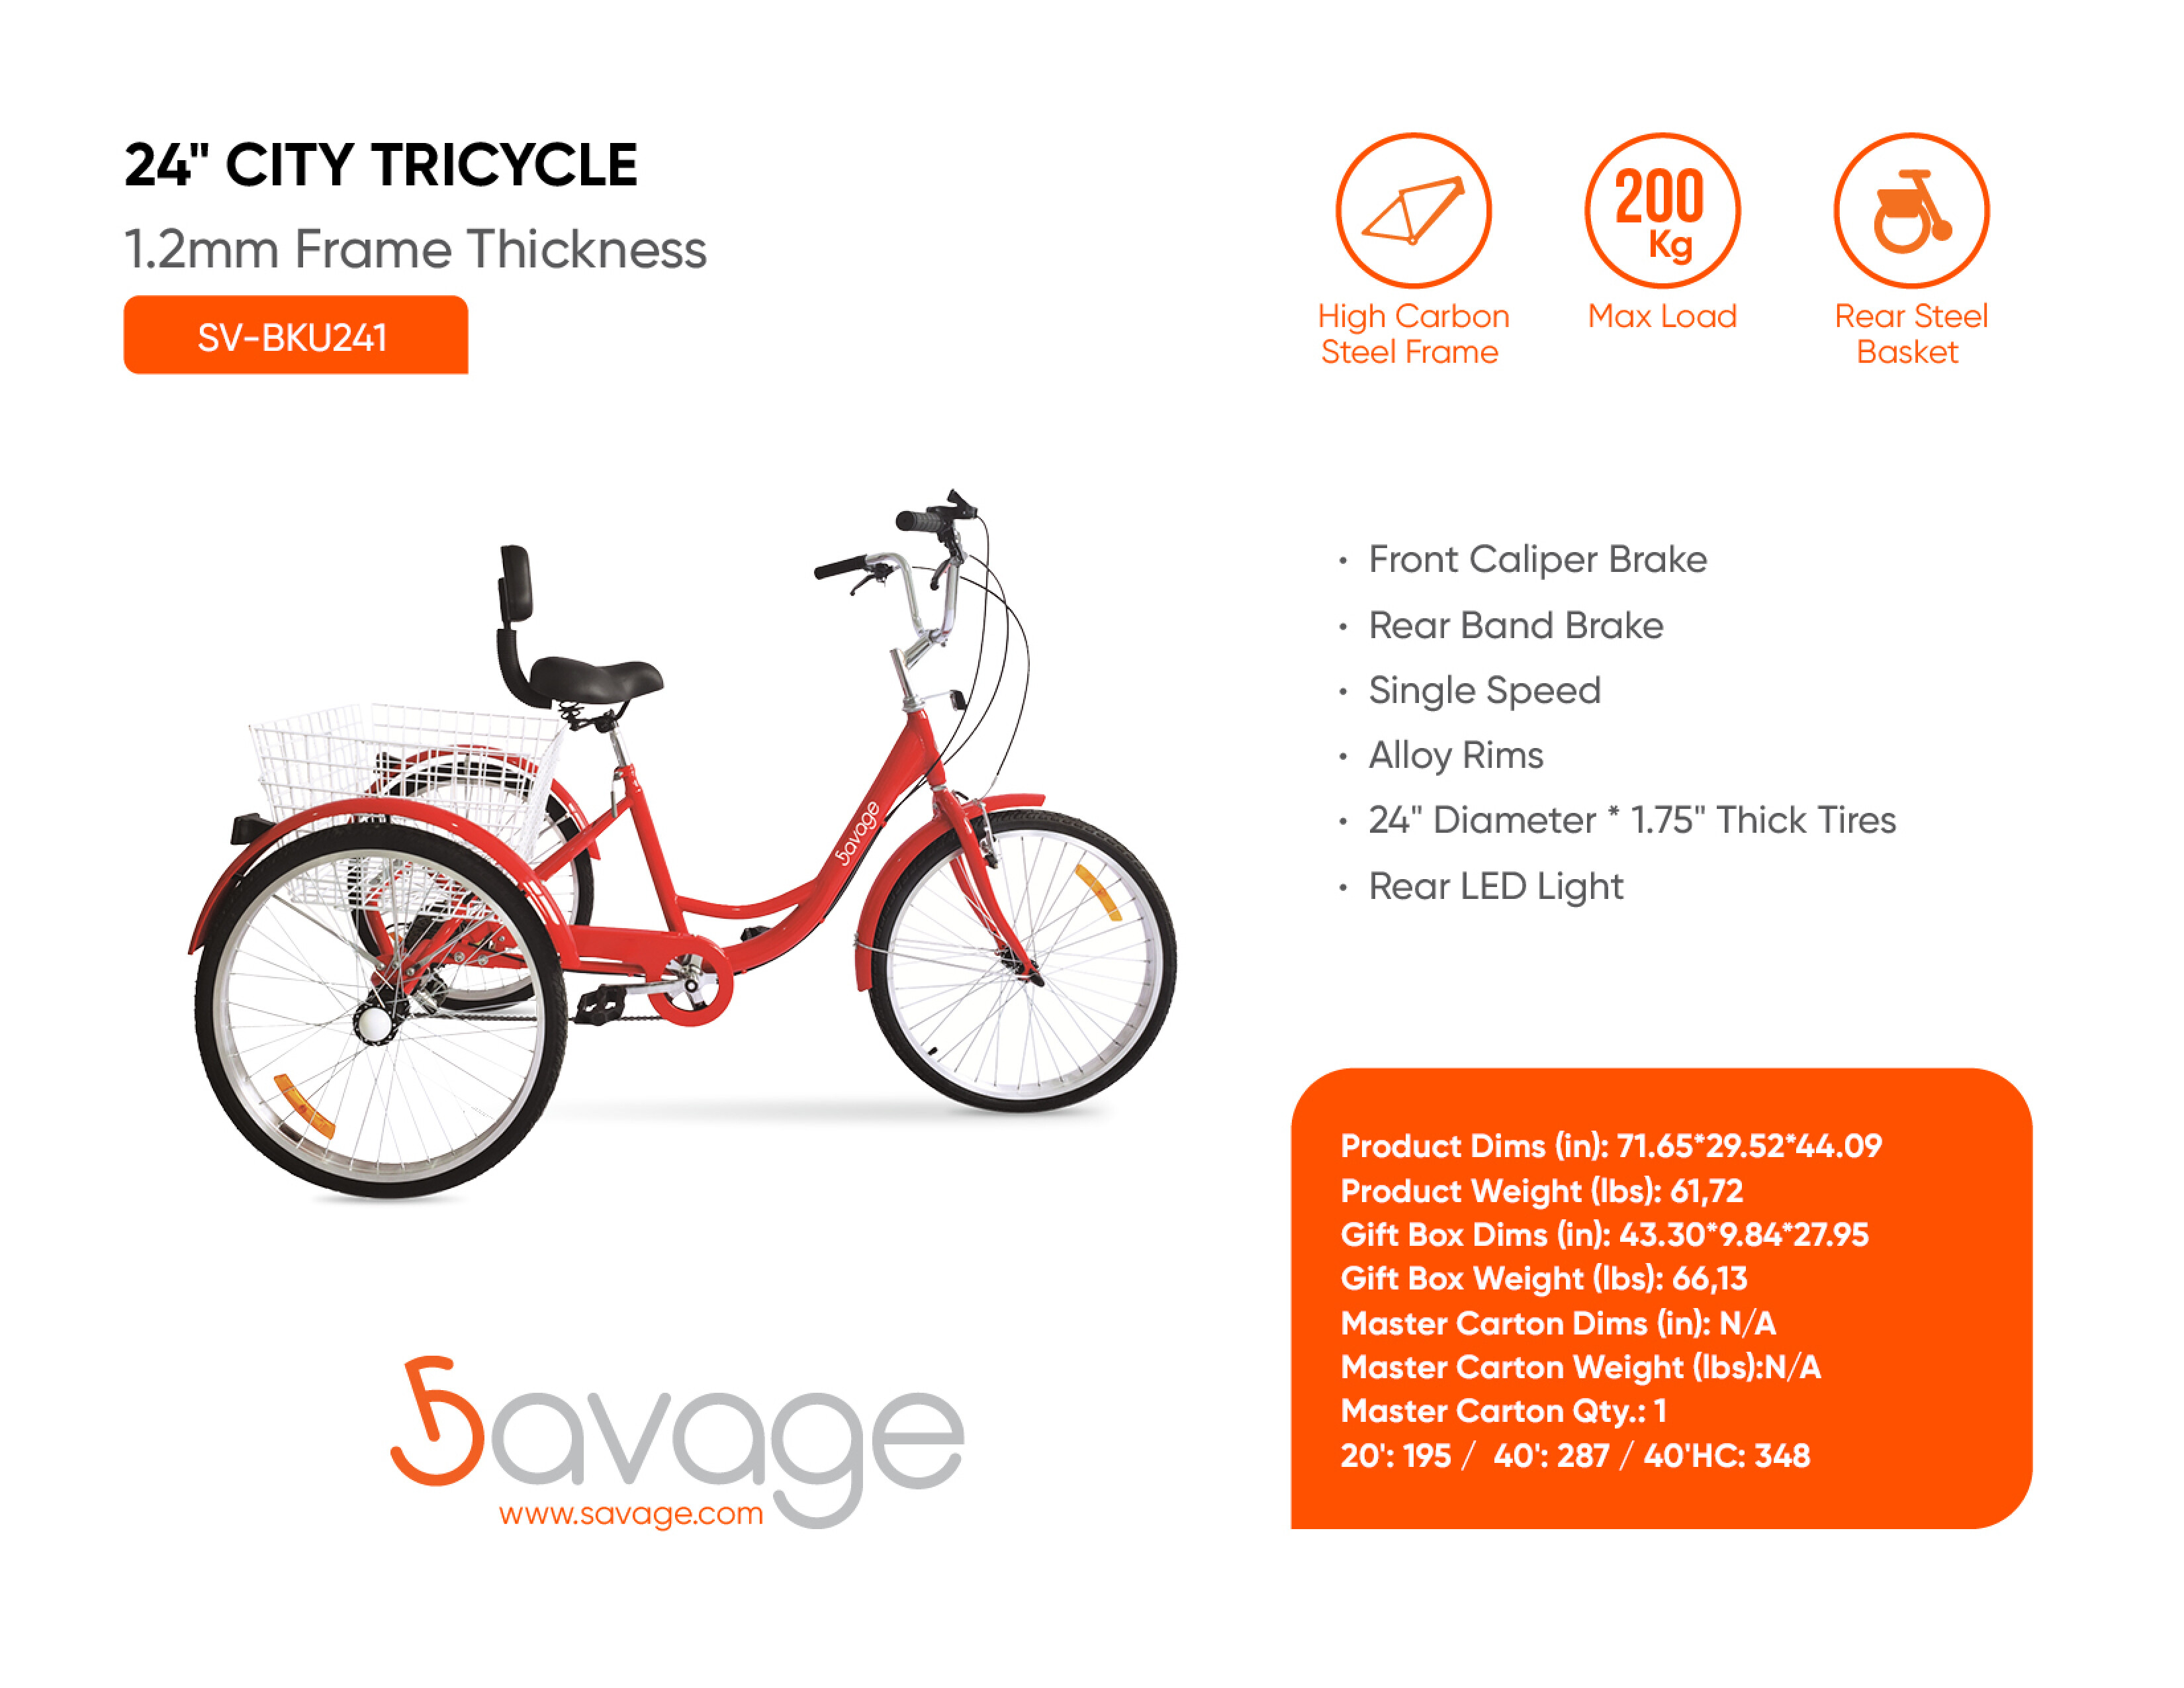 24" City Tricycle